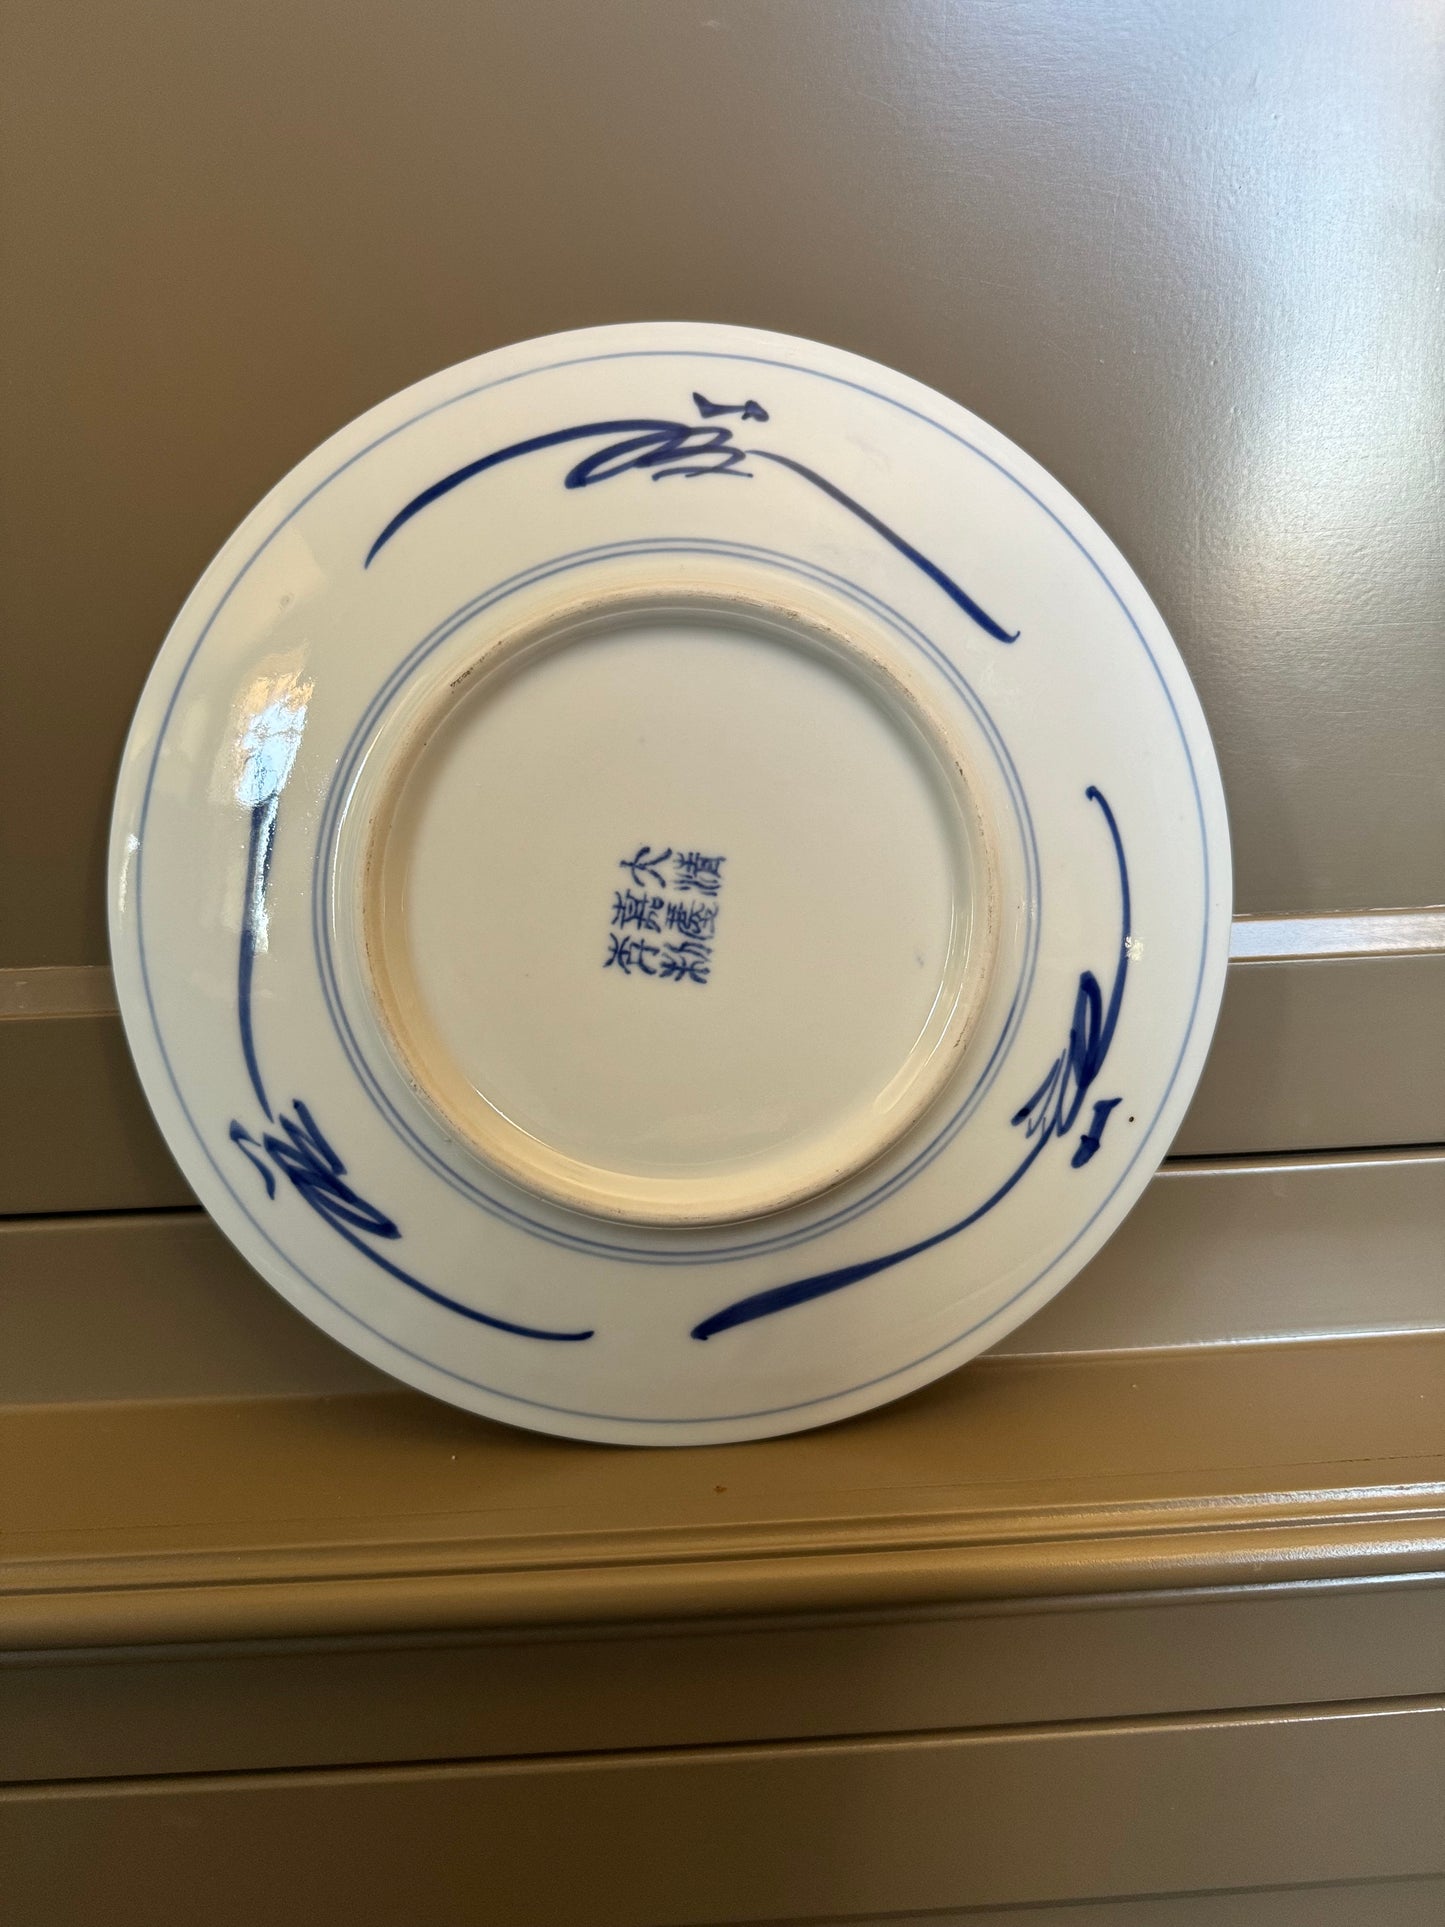 Blue and White Dinner Plate